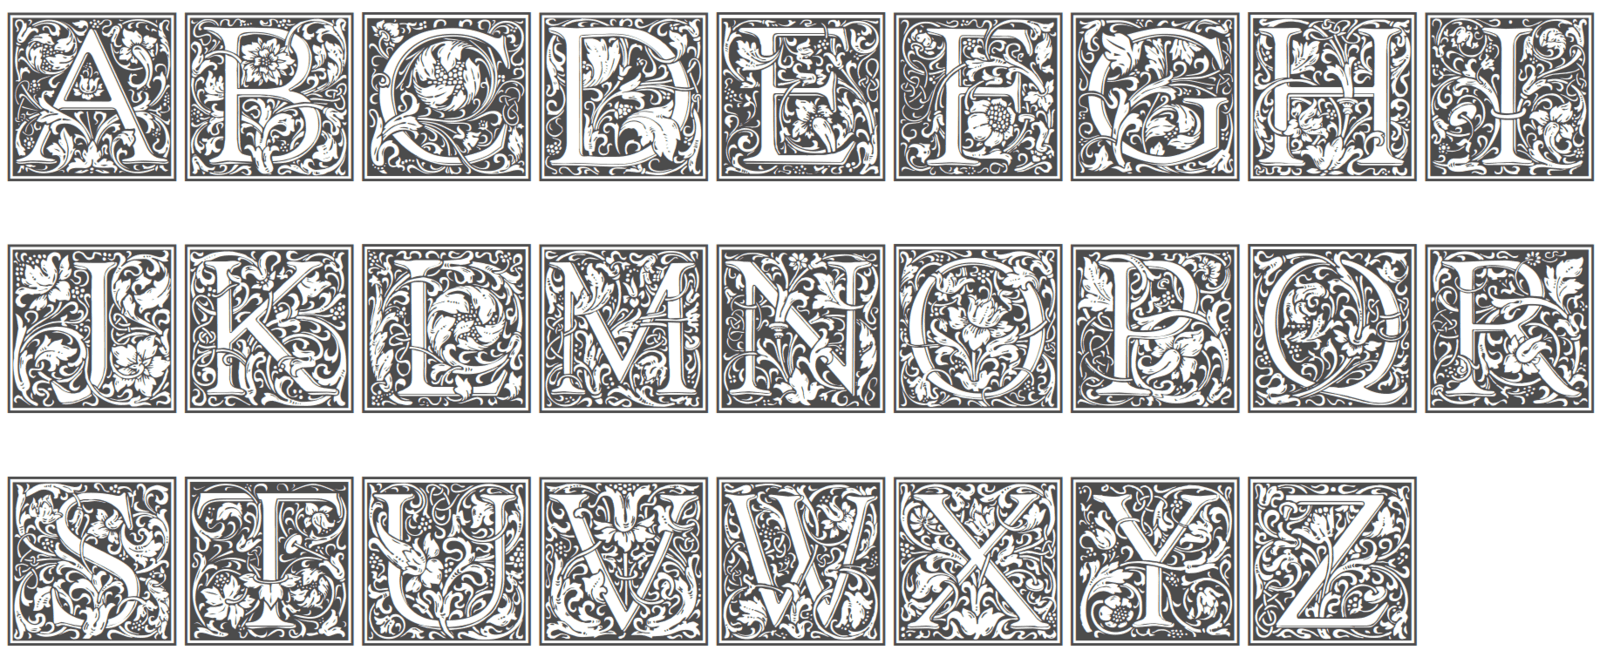 Goudy Initialen (test) is one of the most famous dropcap sets around, and one you’ve seen before, as it is the paradigmatic Art Deco/Arts & Crafts medieval-floral initial set.